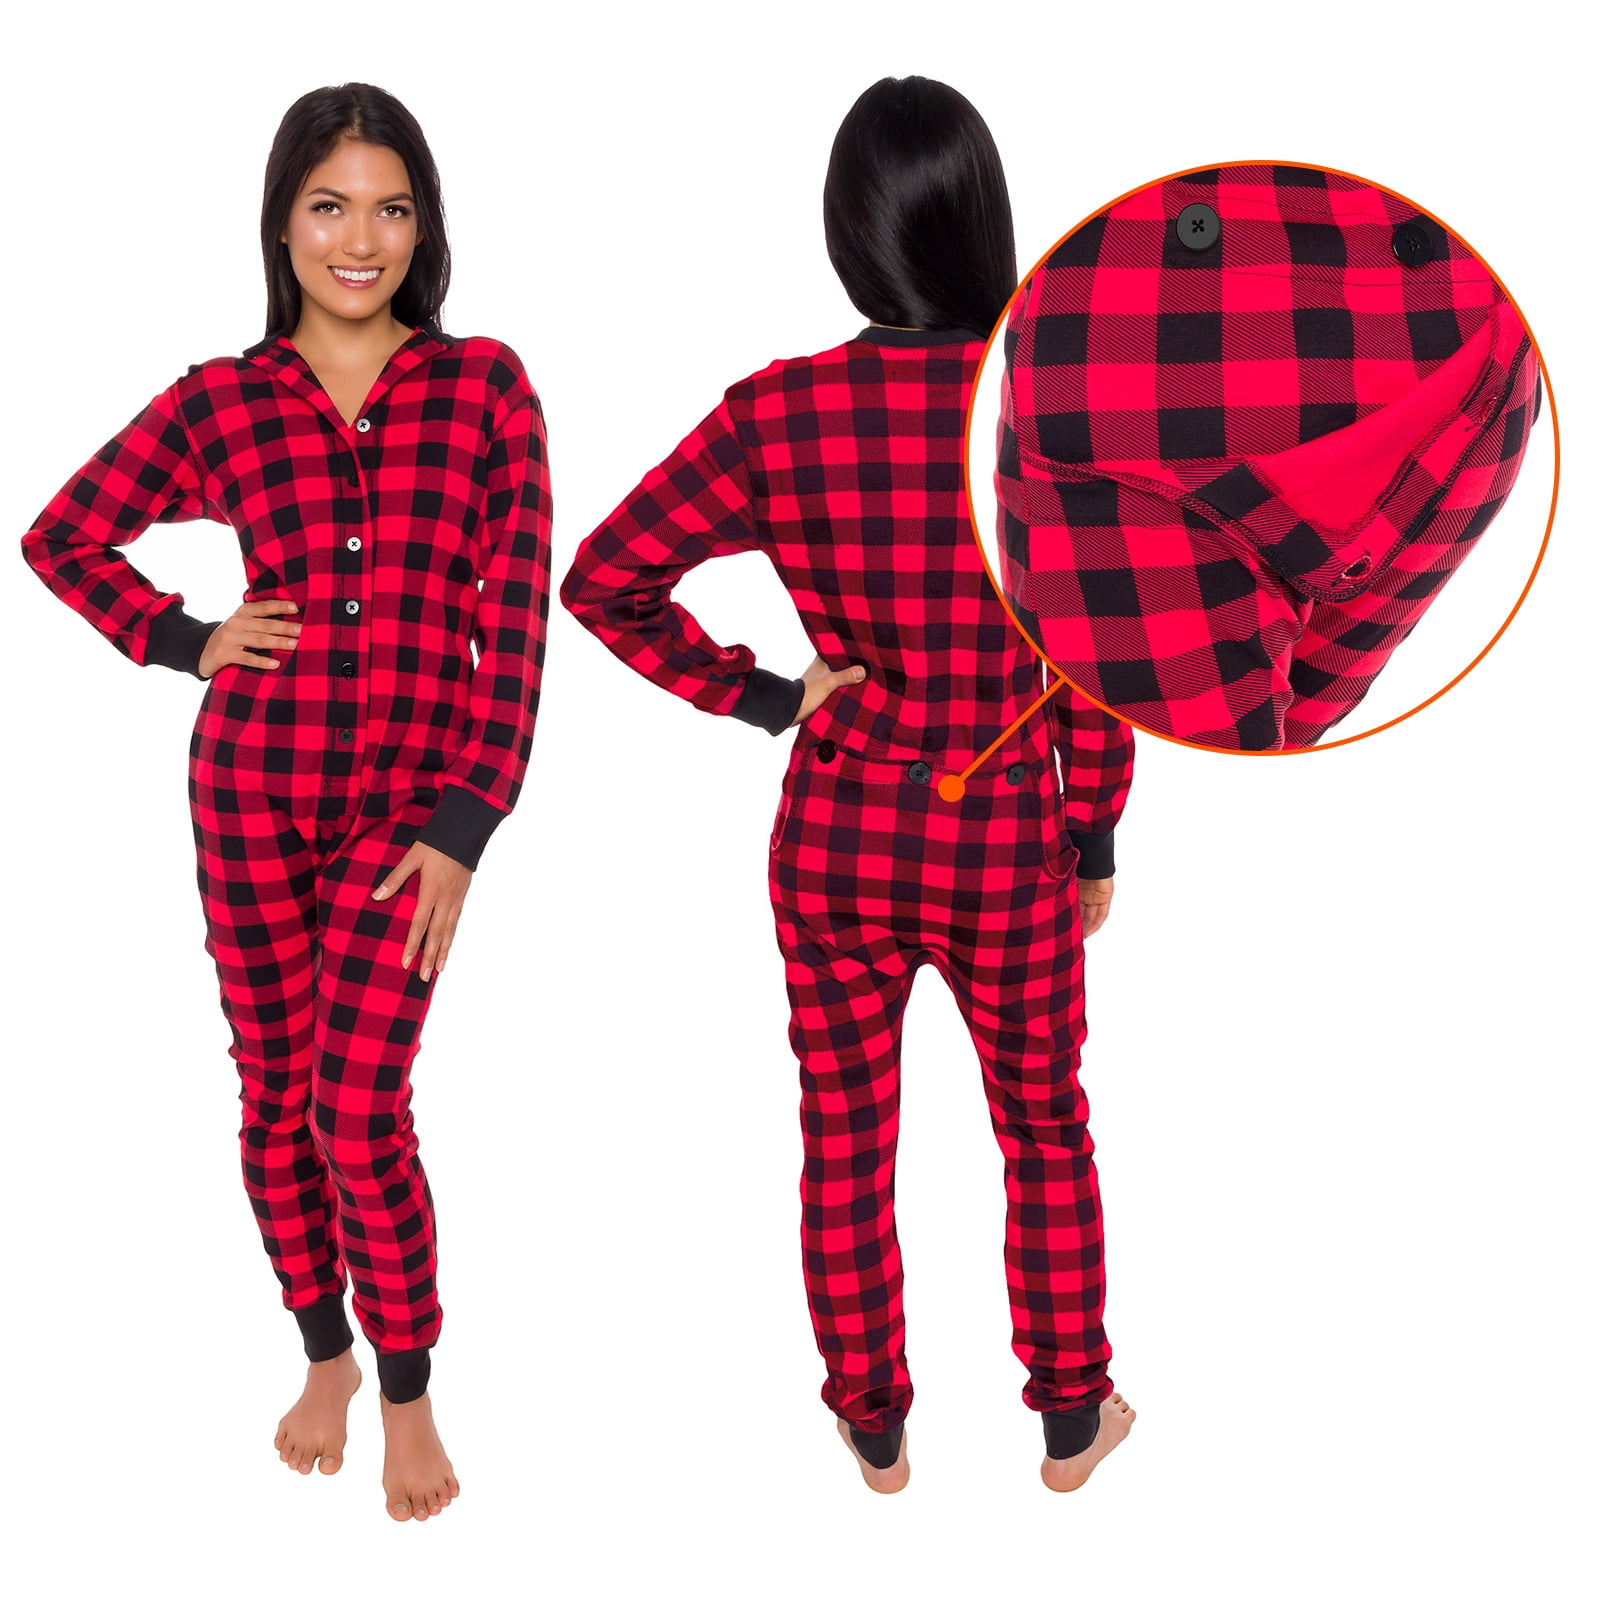 Silver Lilly Buffalo Plaid Women's One Piece Pajamas - Adult Unisex Union  Suit with Drop Seat (Green/Black Plaid, Large) 